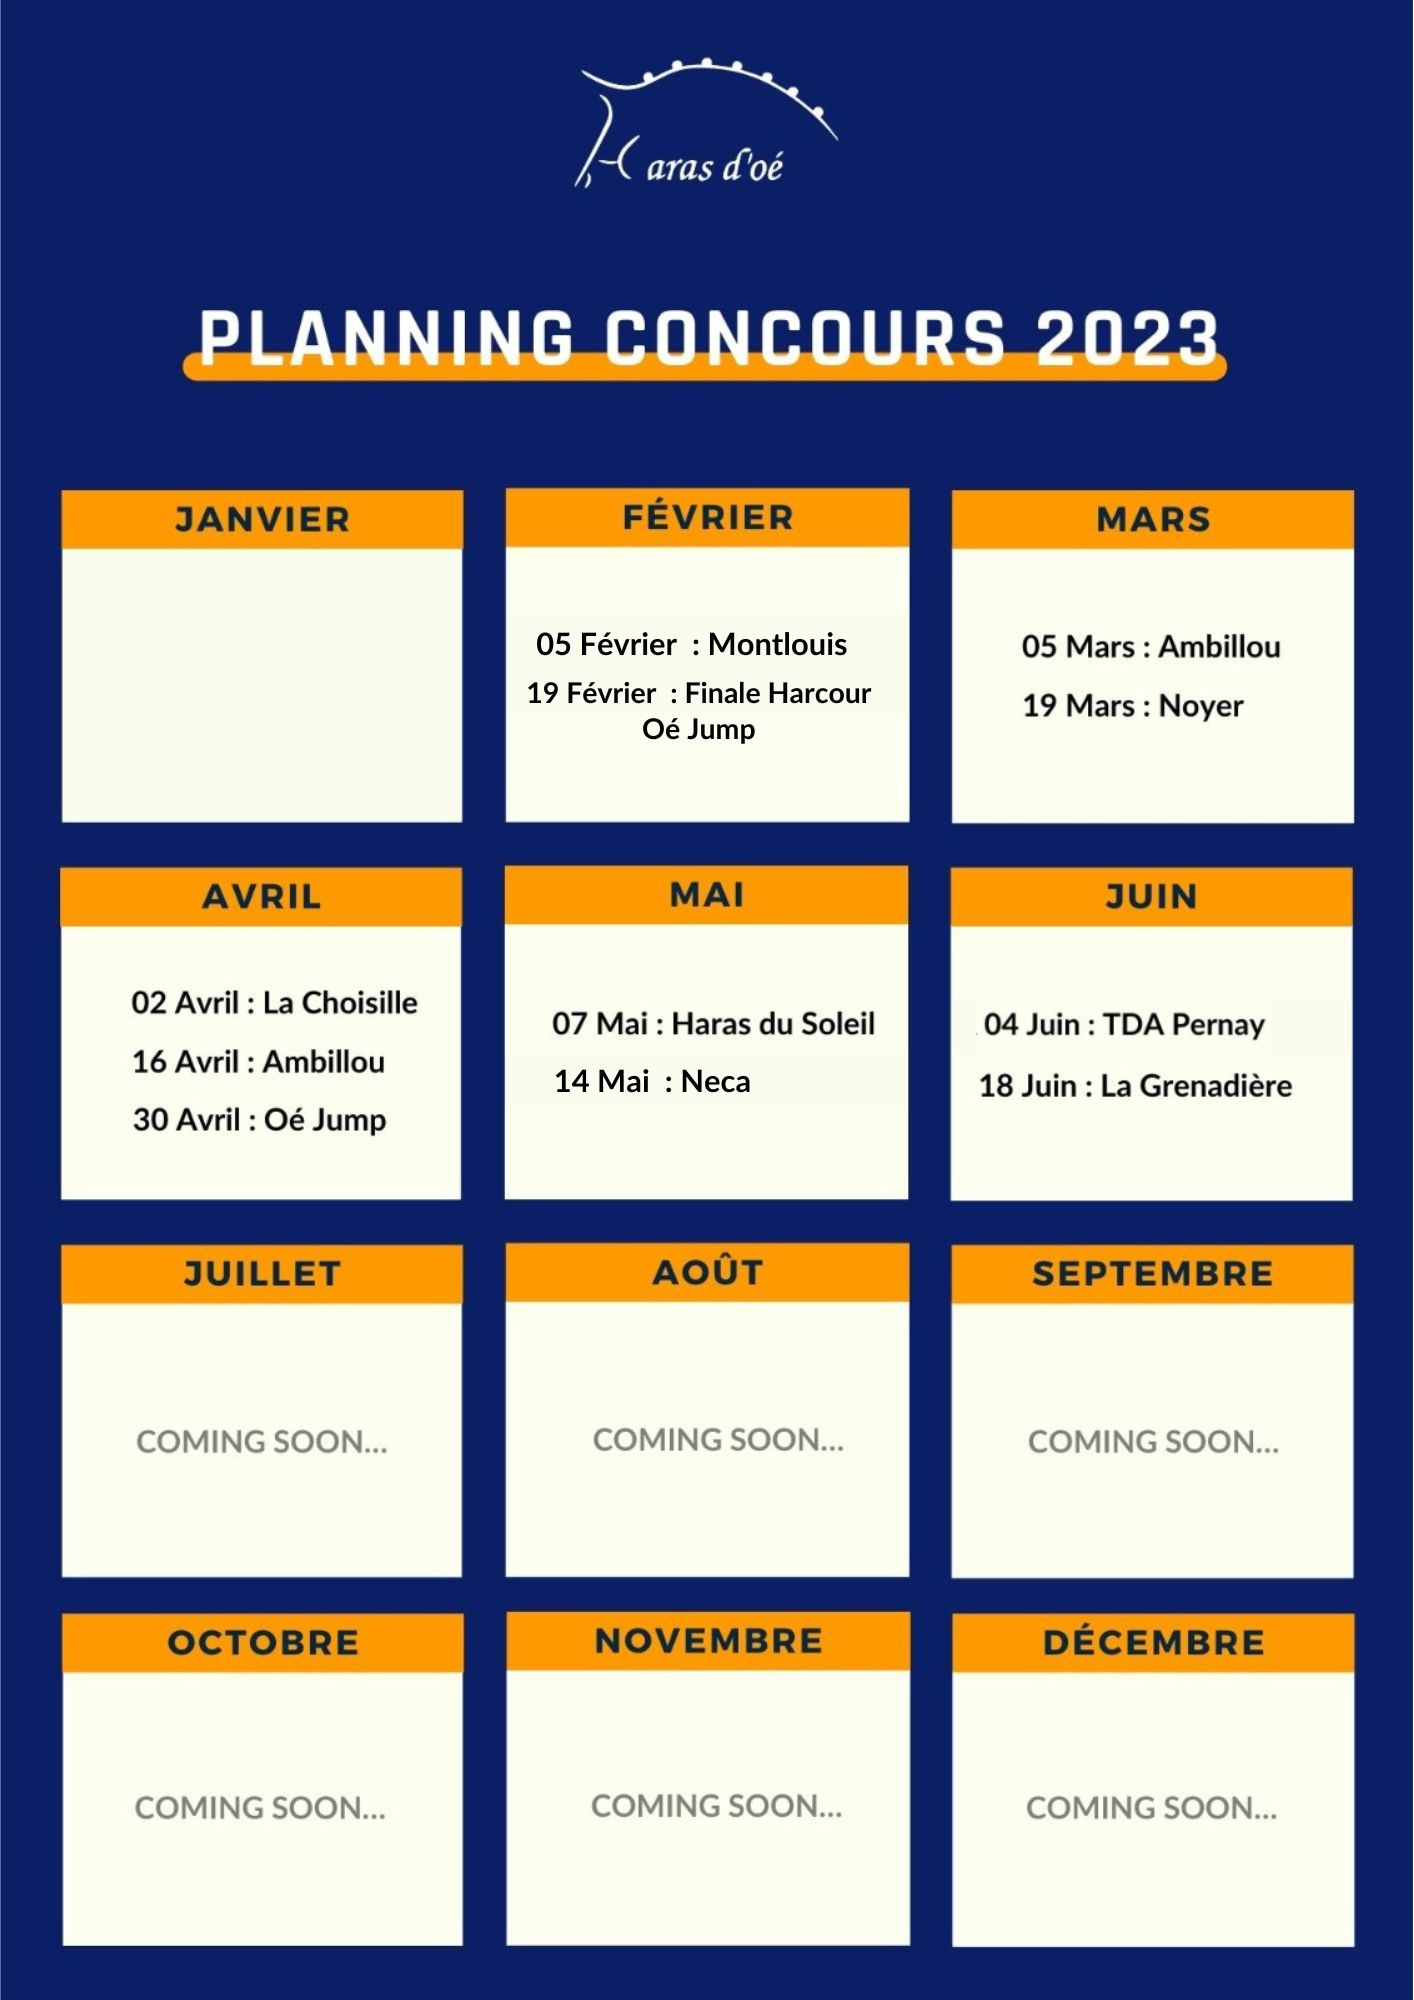 PLANNING CONCOURS 2023